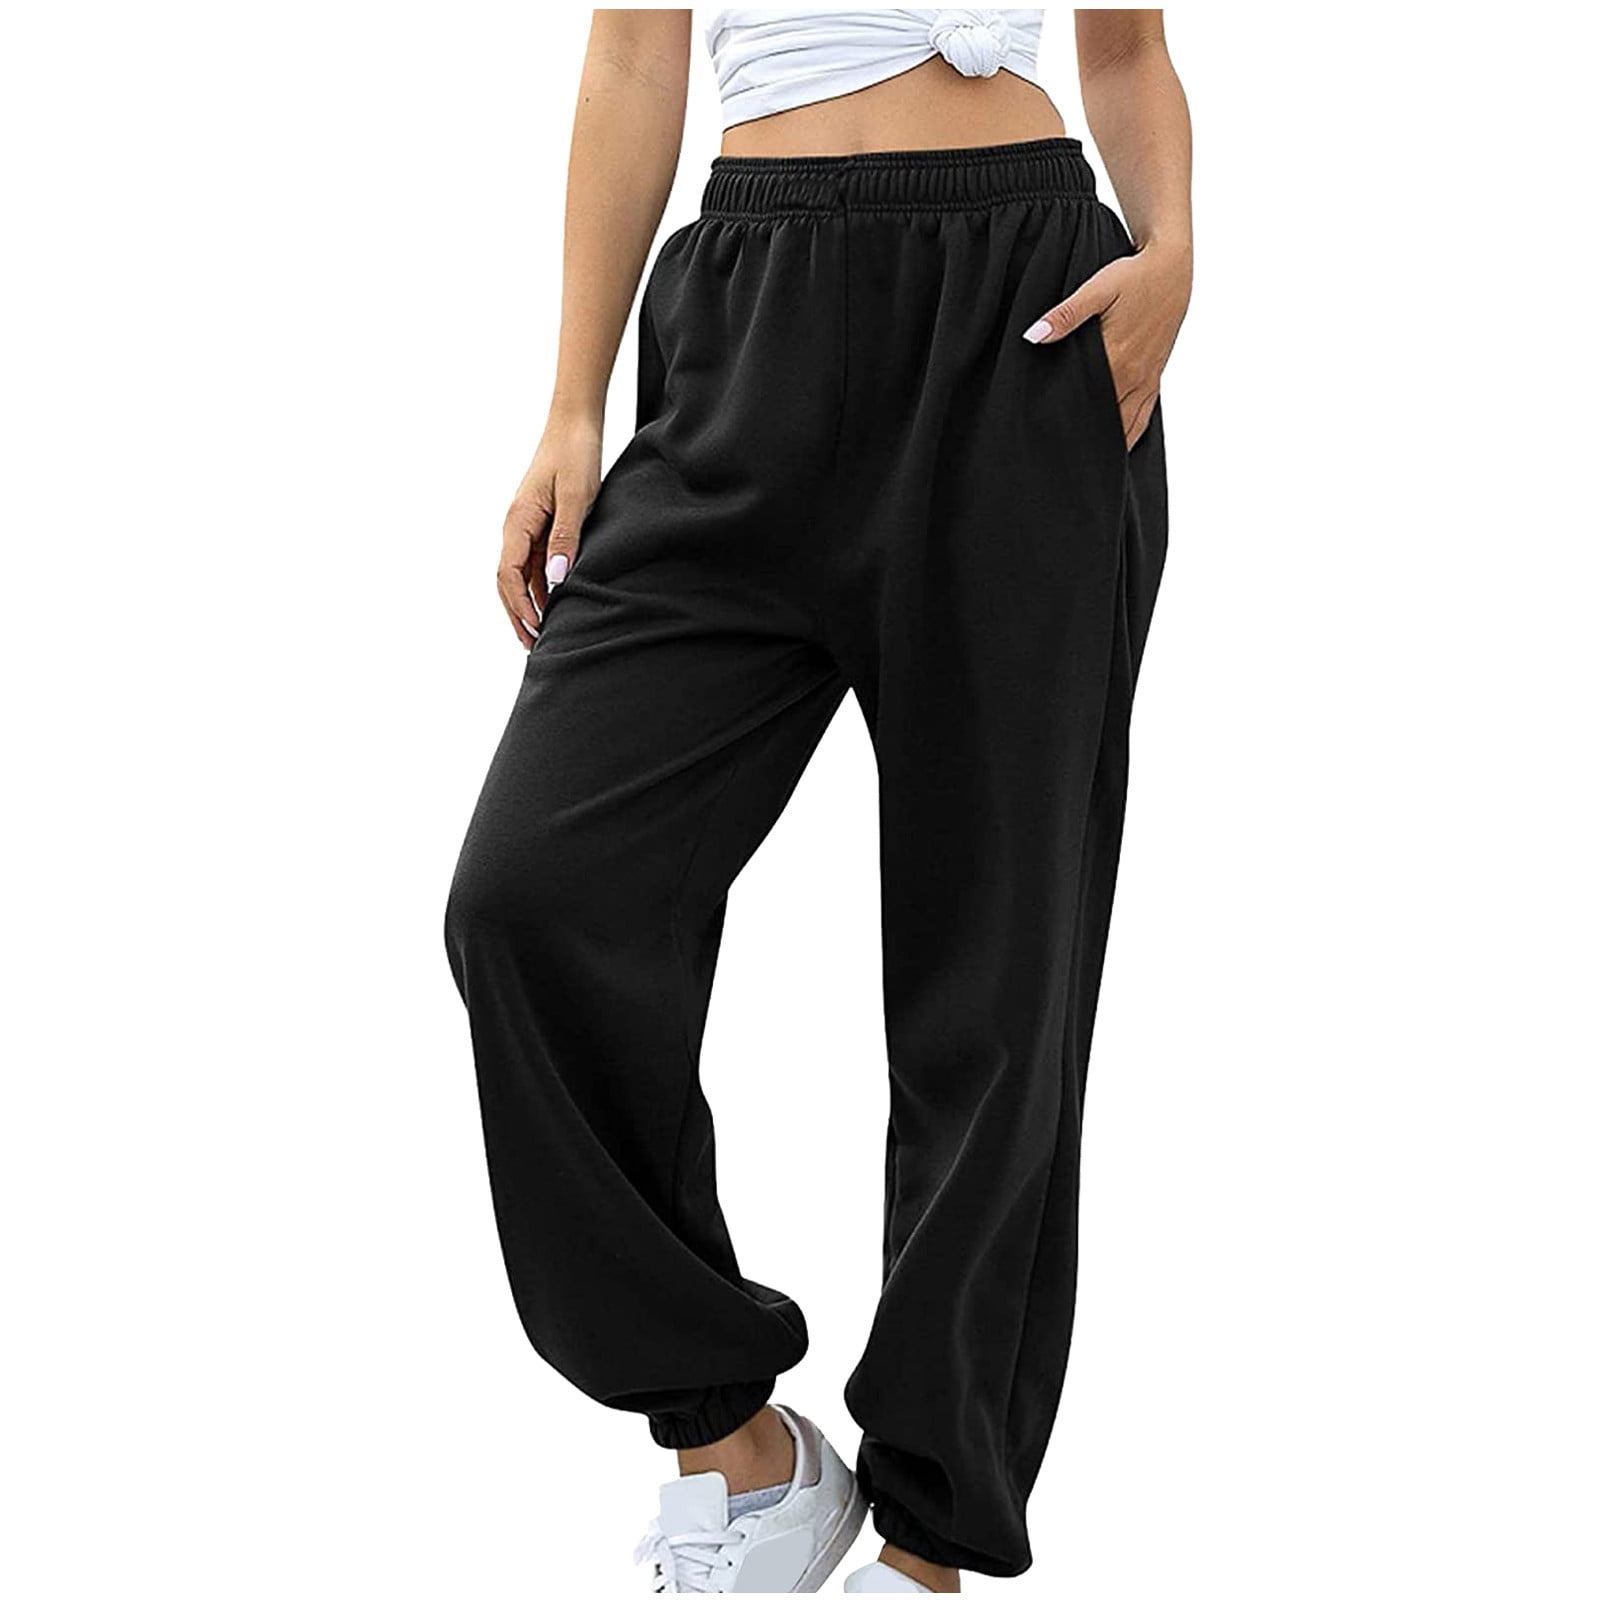 INTICOSI Women's Lightweight Drawstring Sweatpants Jogger Pants with Pockets,Yoga Workout Running Casual Pants